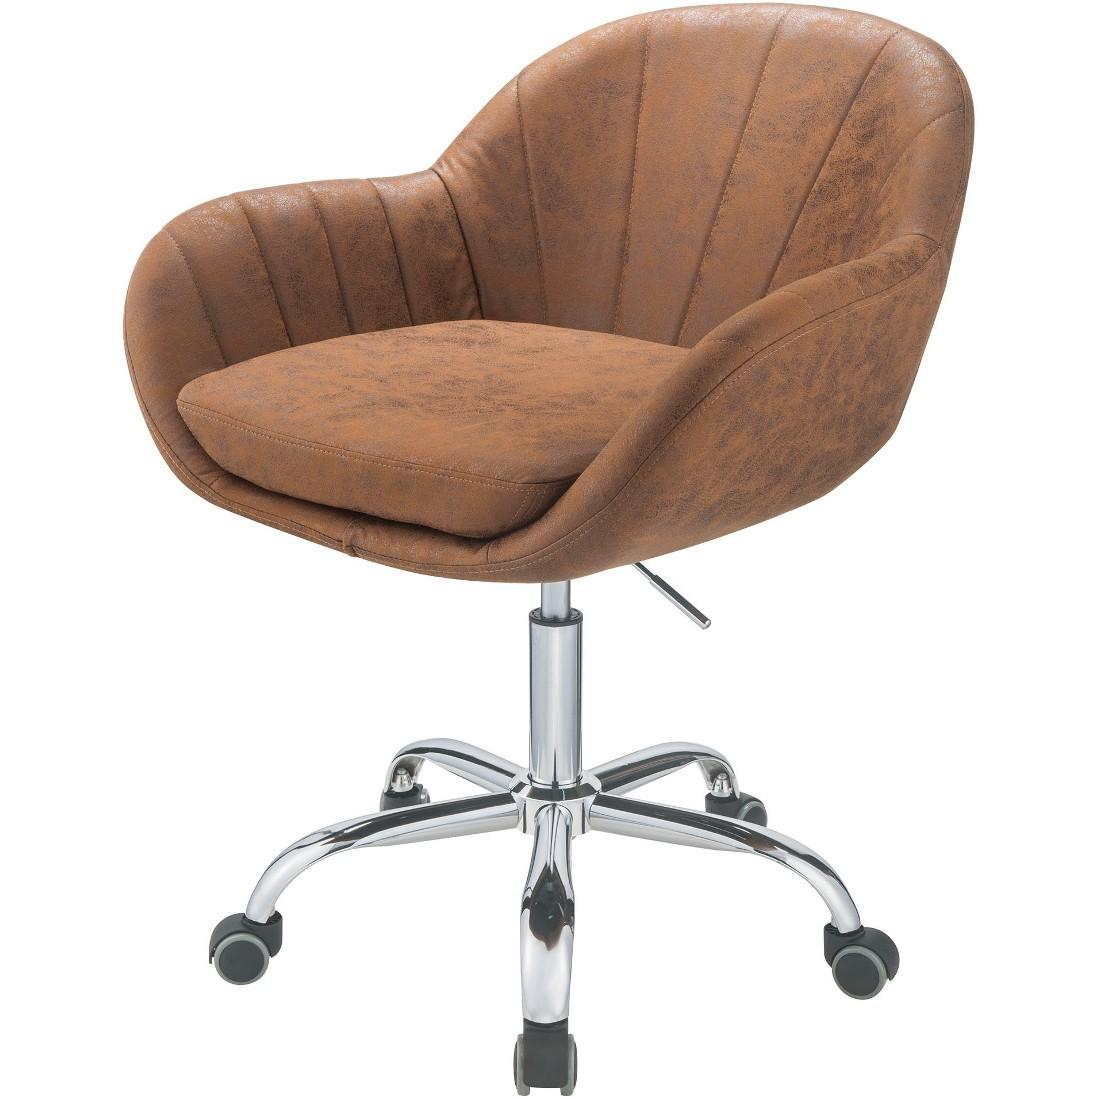 Contemporary Office Chair Giolla Giolla 92503 in Chrome, Chocolate PU